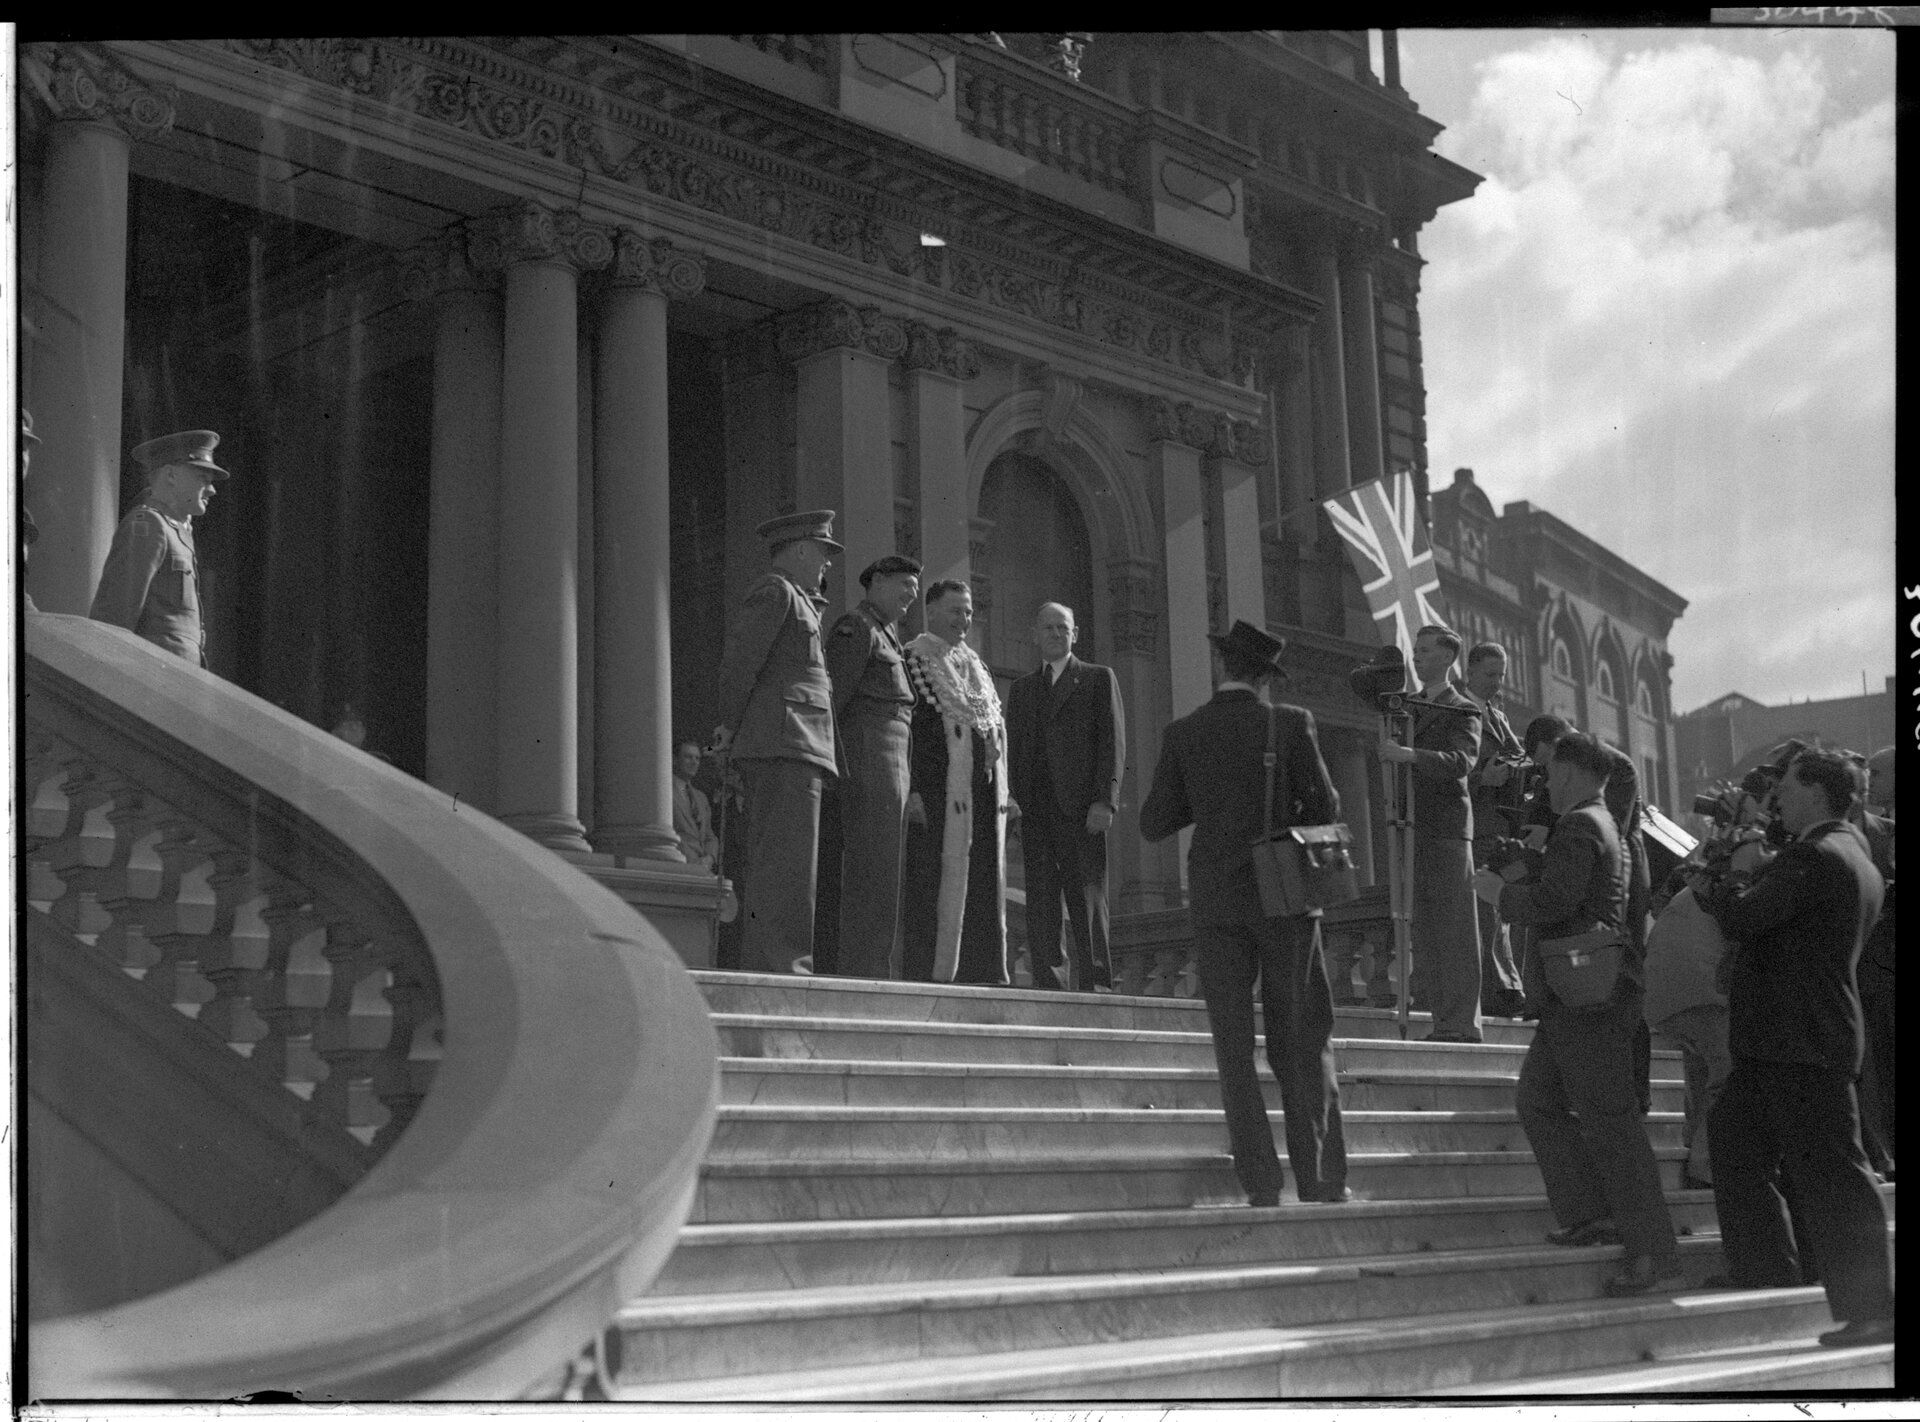 A group of men in uniform and formal attire stand at the top of the stairs to the twon hall